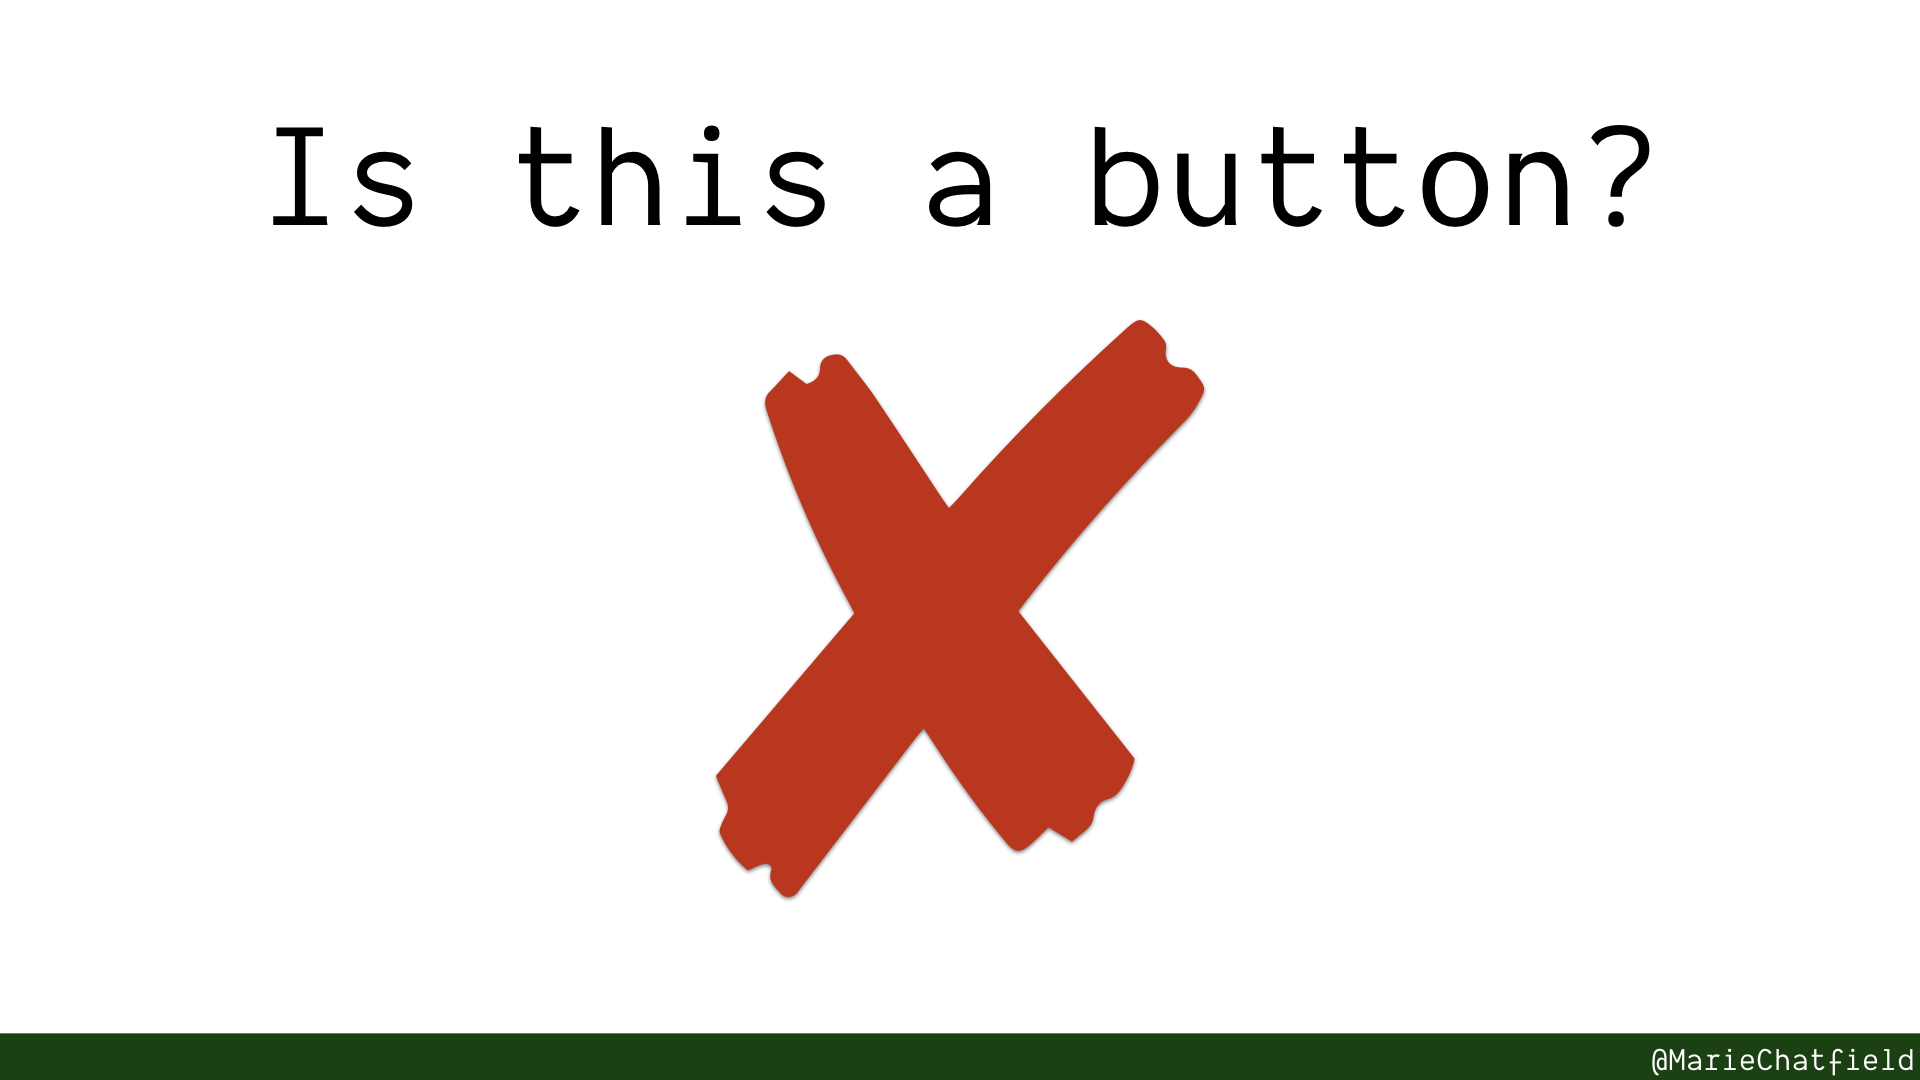 Is it a button? Big red X no